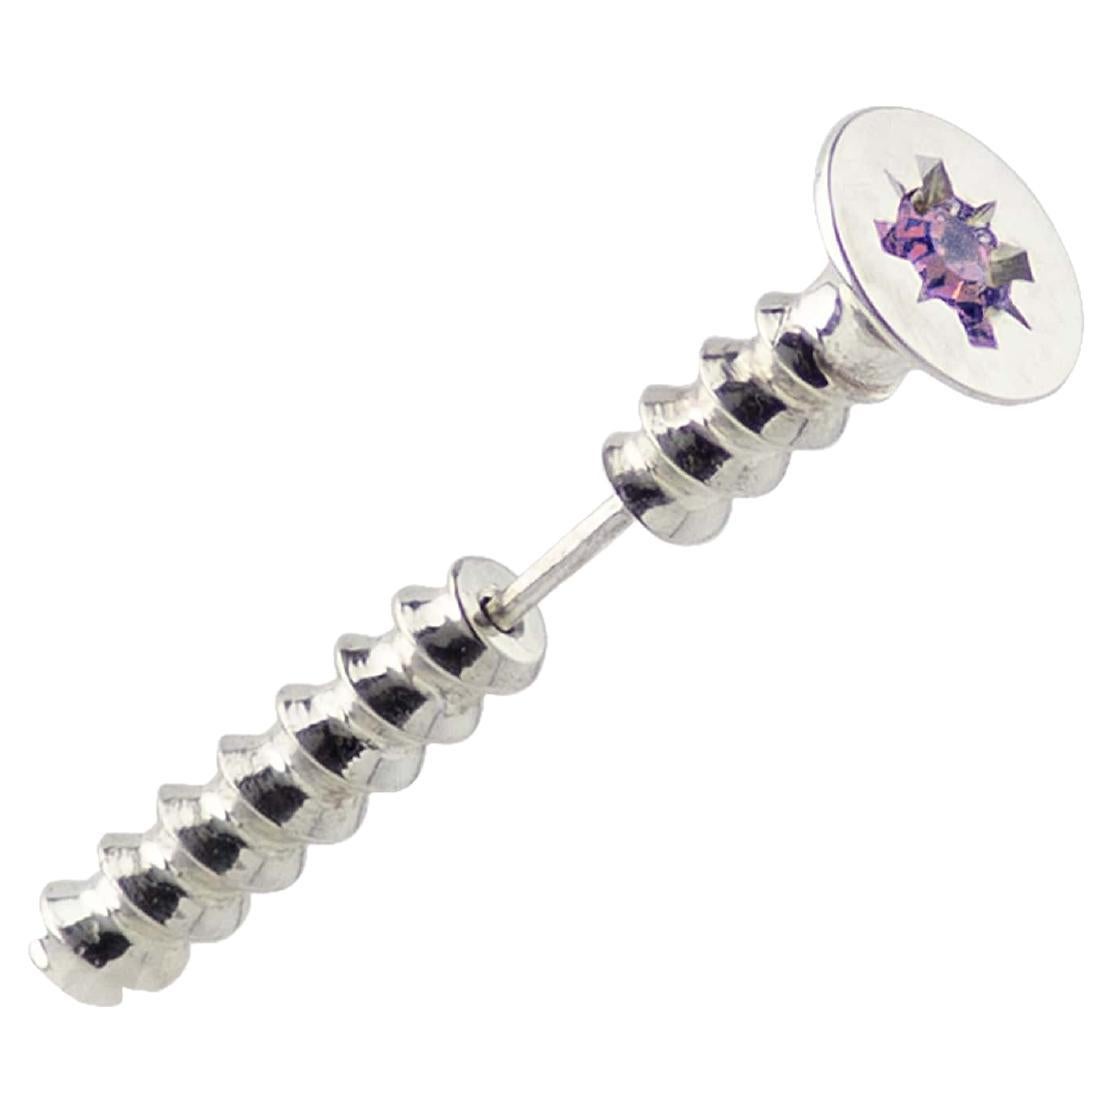 Sterling Silver Screw Shaped Silver Earring Topped with an Amethyst Stone